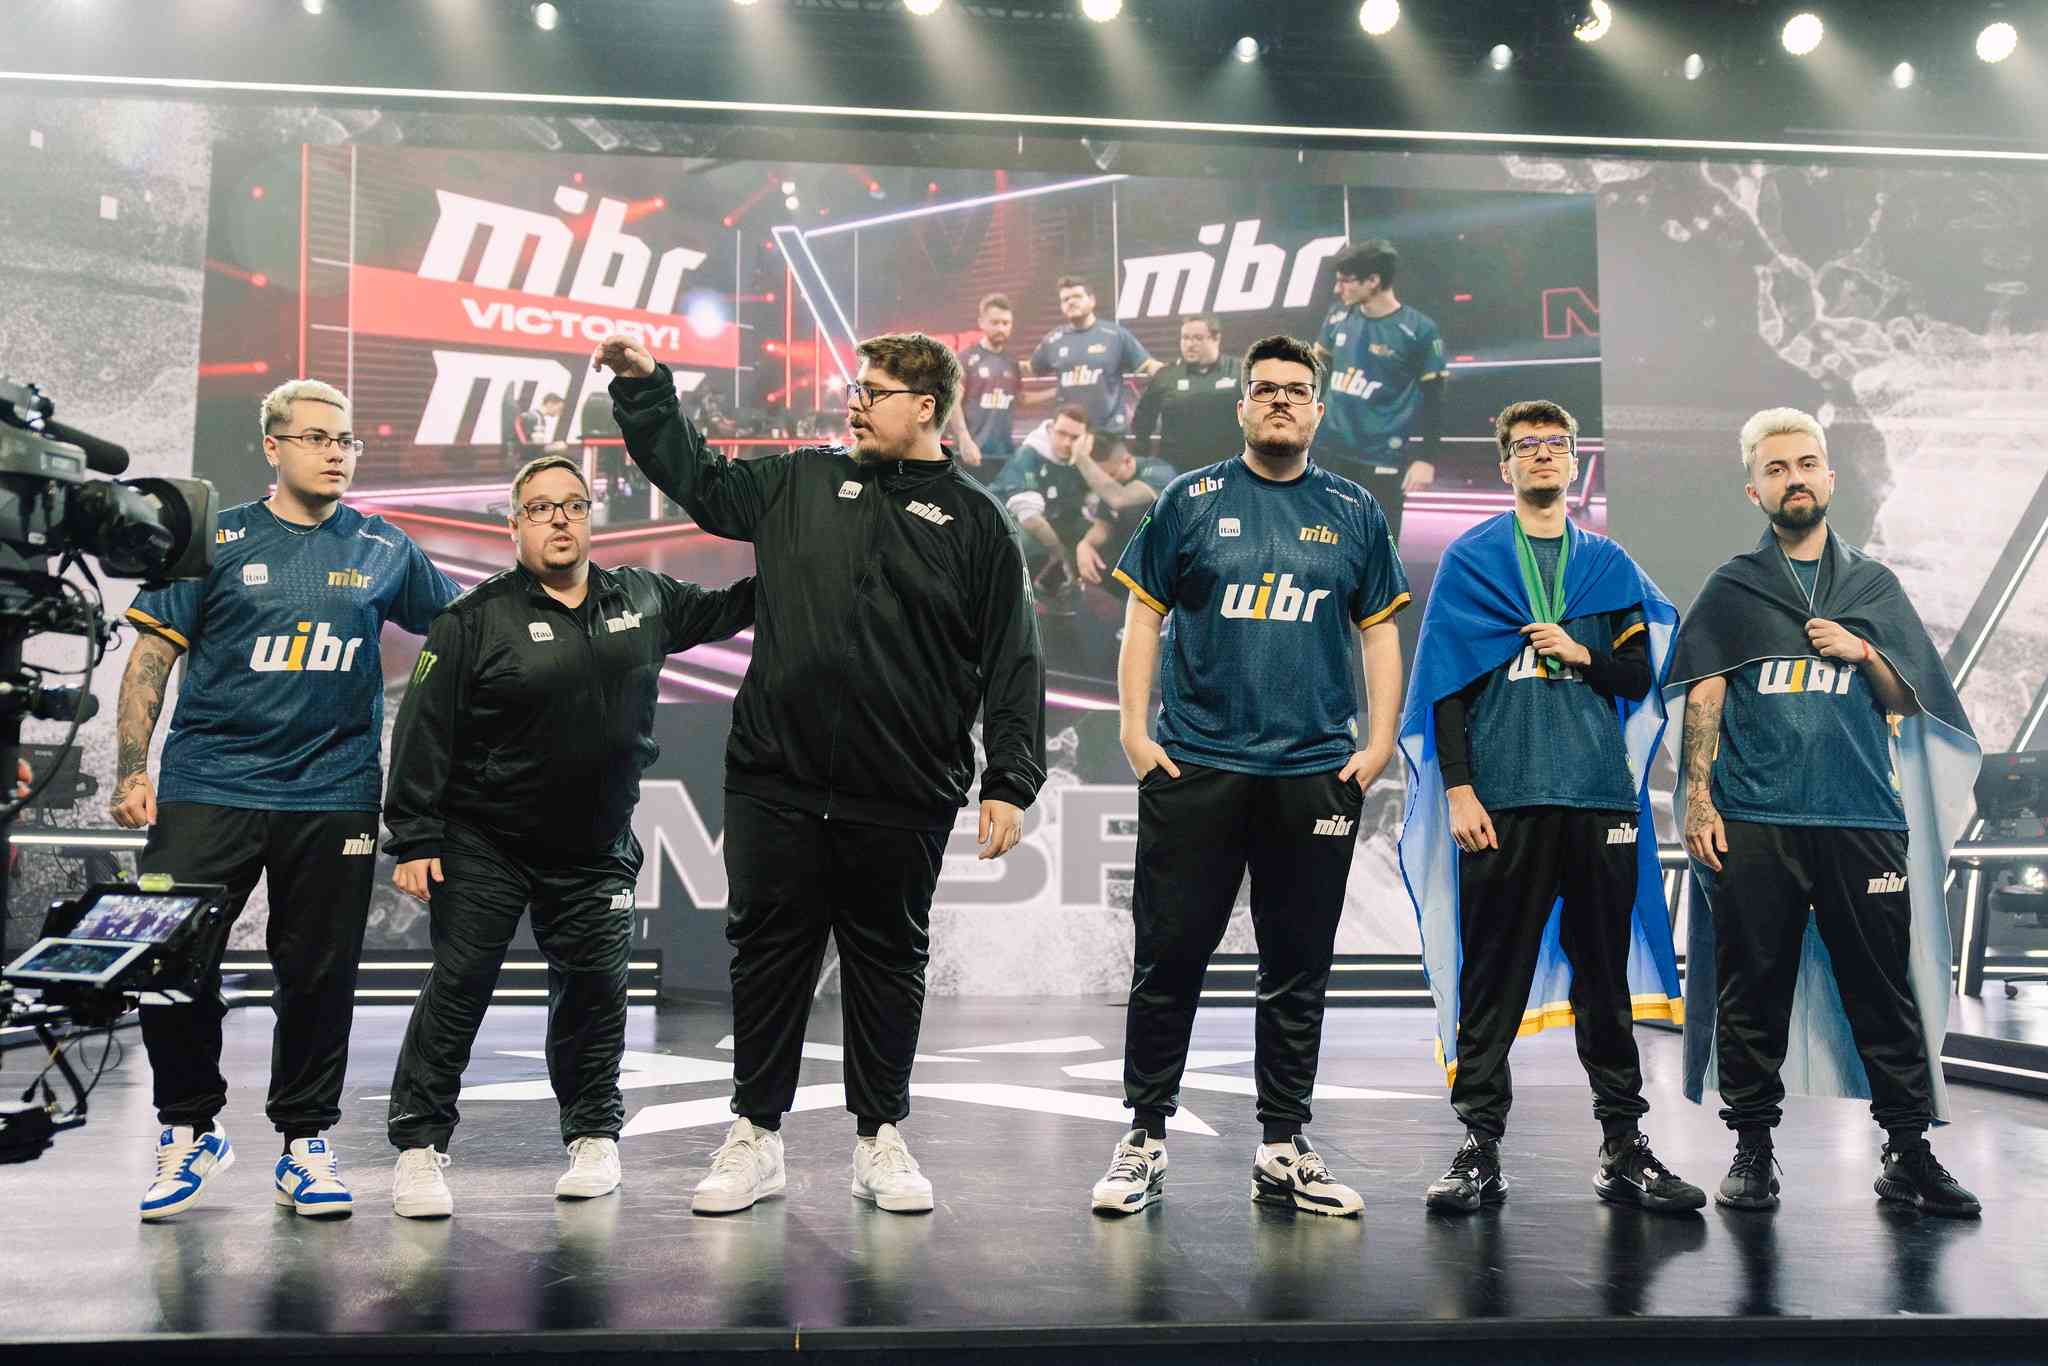 Many things will surely be looked at within MIBR as the team looks ahead to 2024 (Image Credits: Tina Jo/Riot Games)